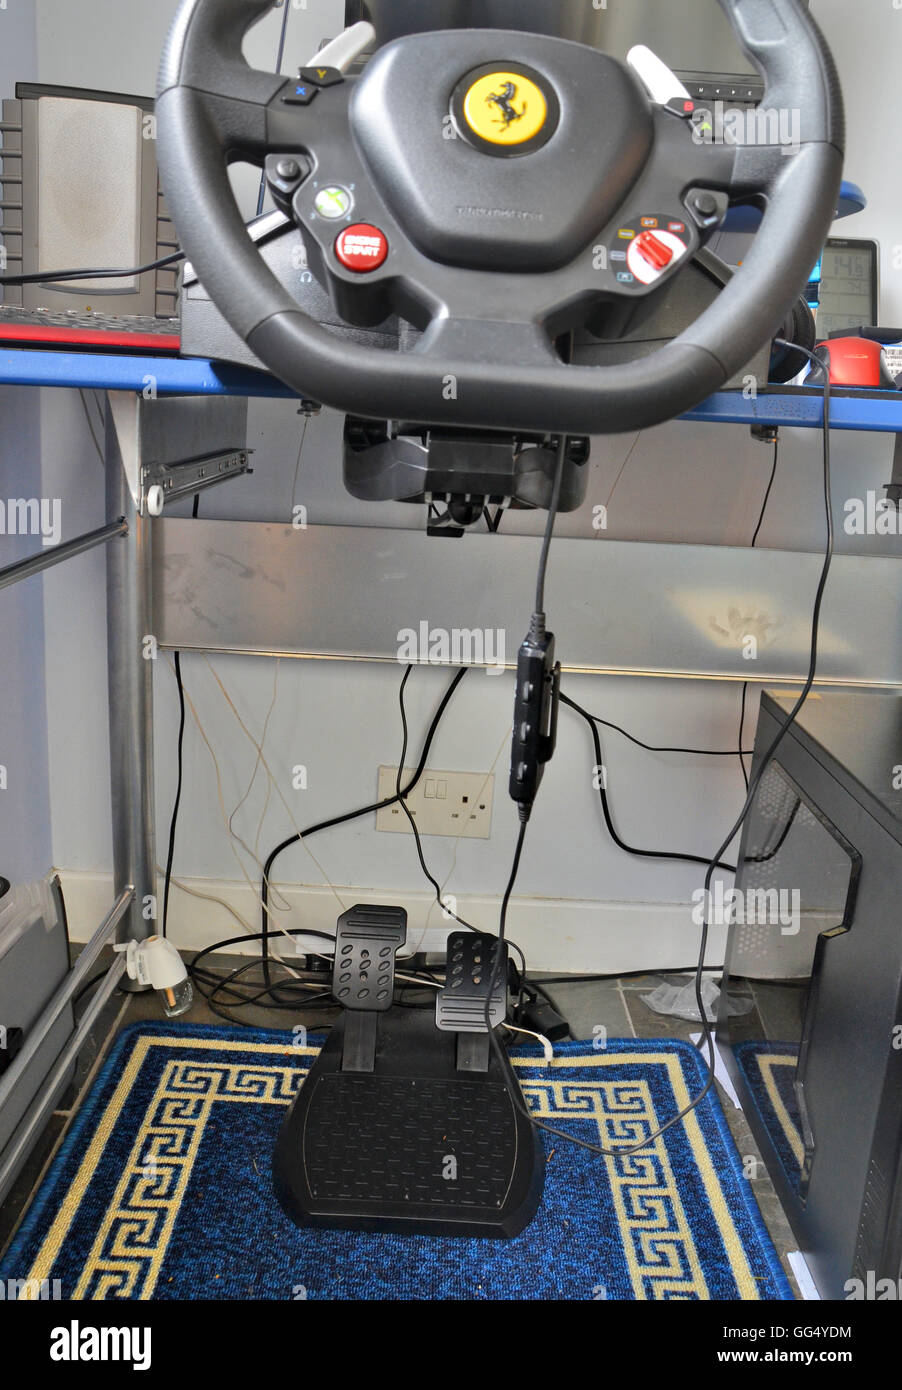 computer gaming rig - includes steering wheel assembled to desktop and  foot pedals, brake and accelerator and speakers. Stock Photo